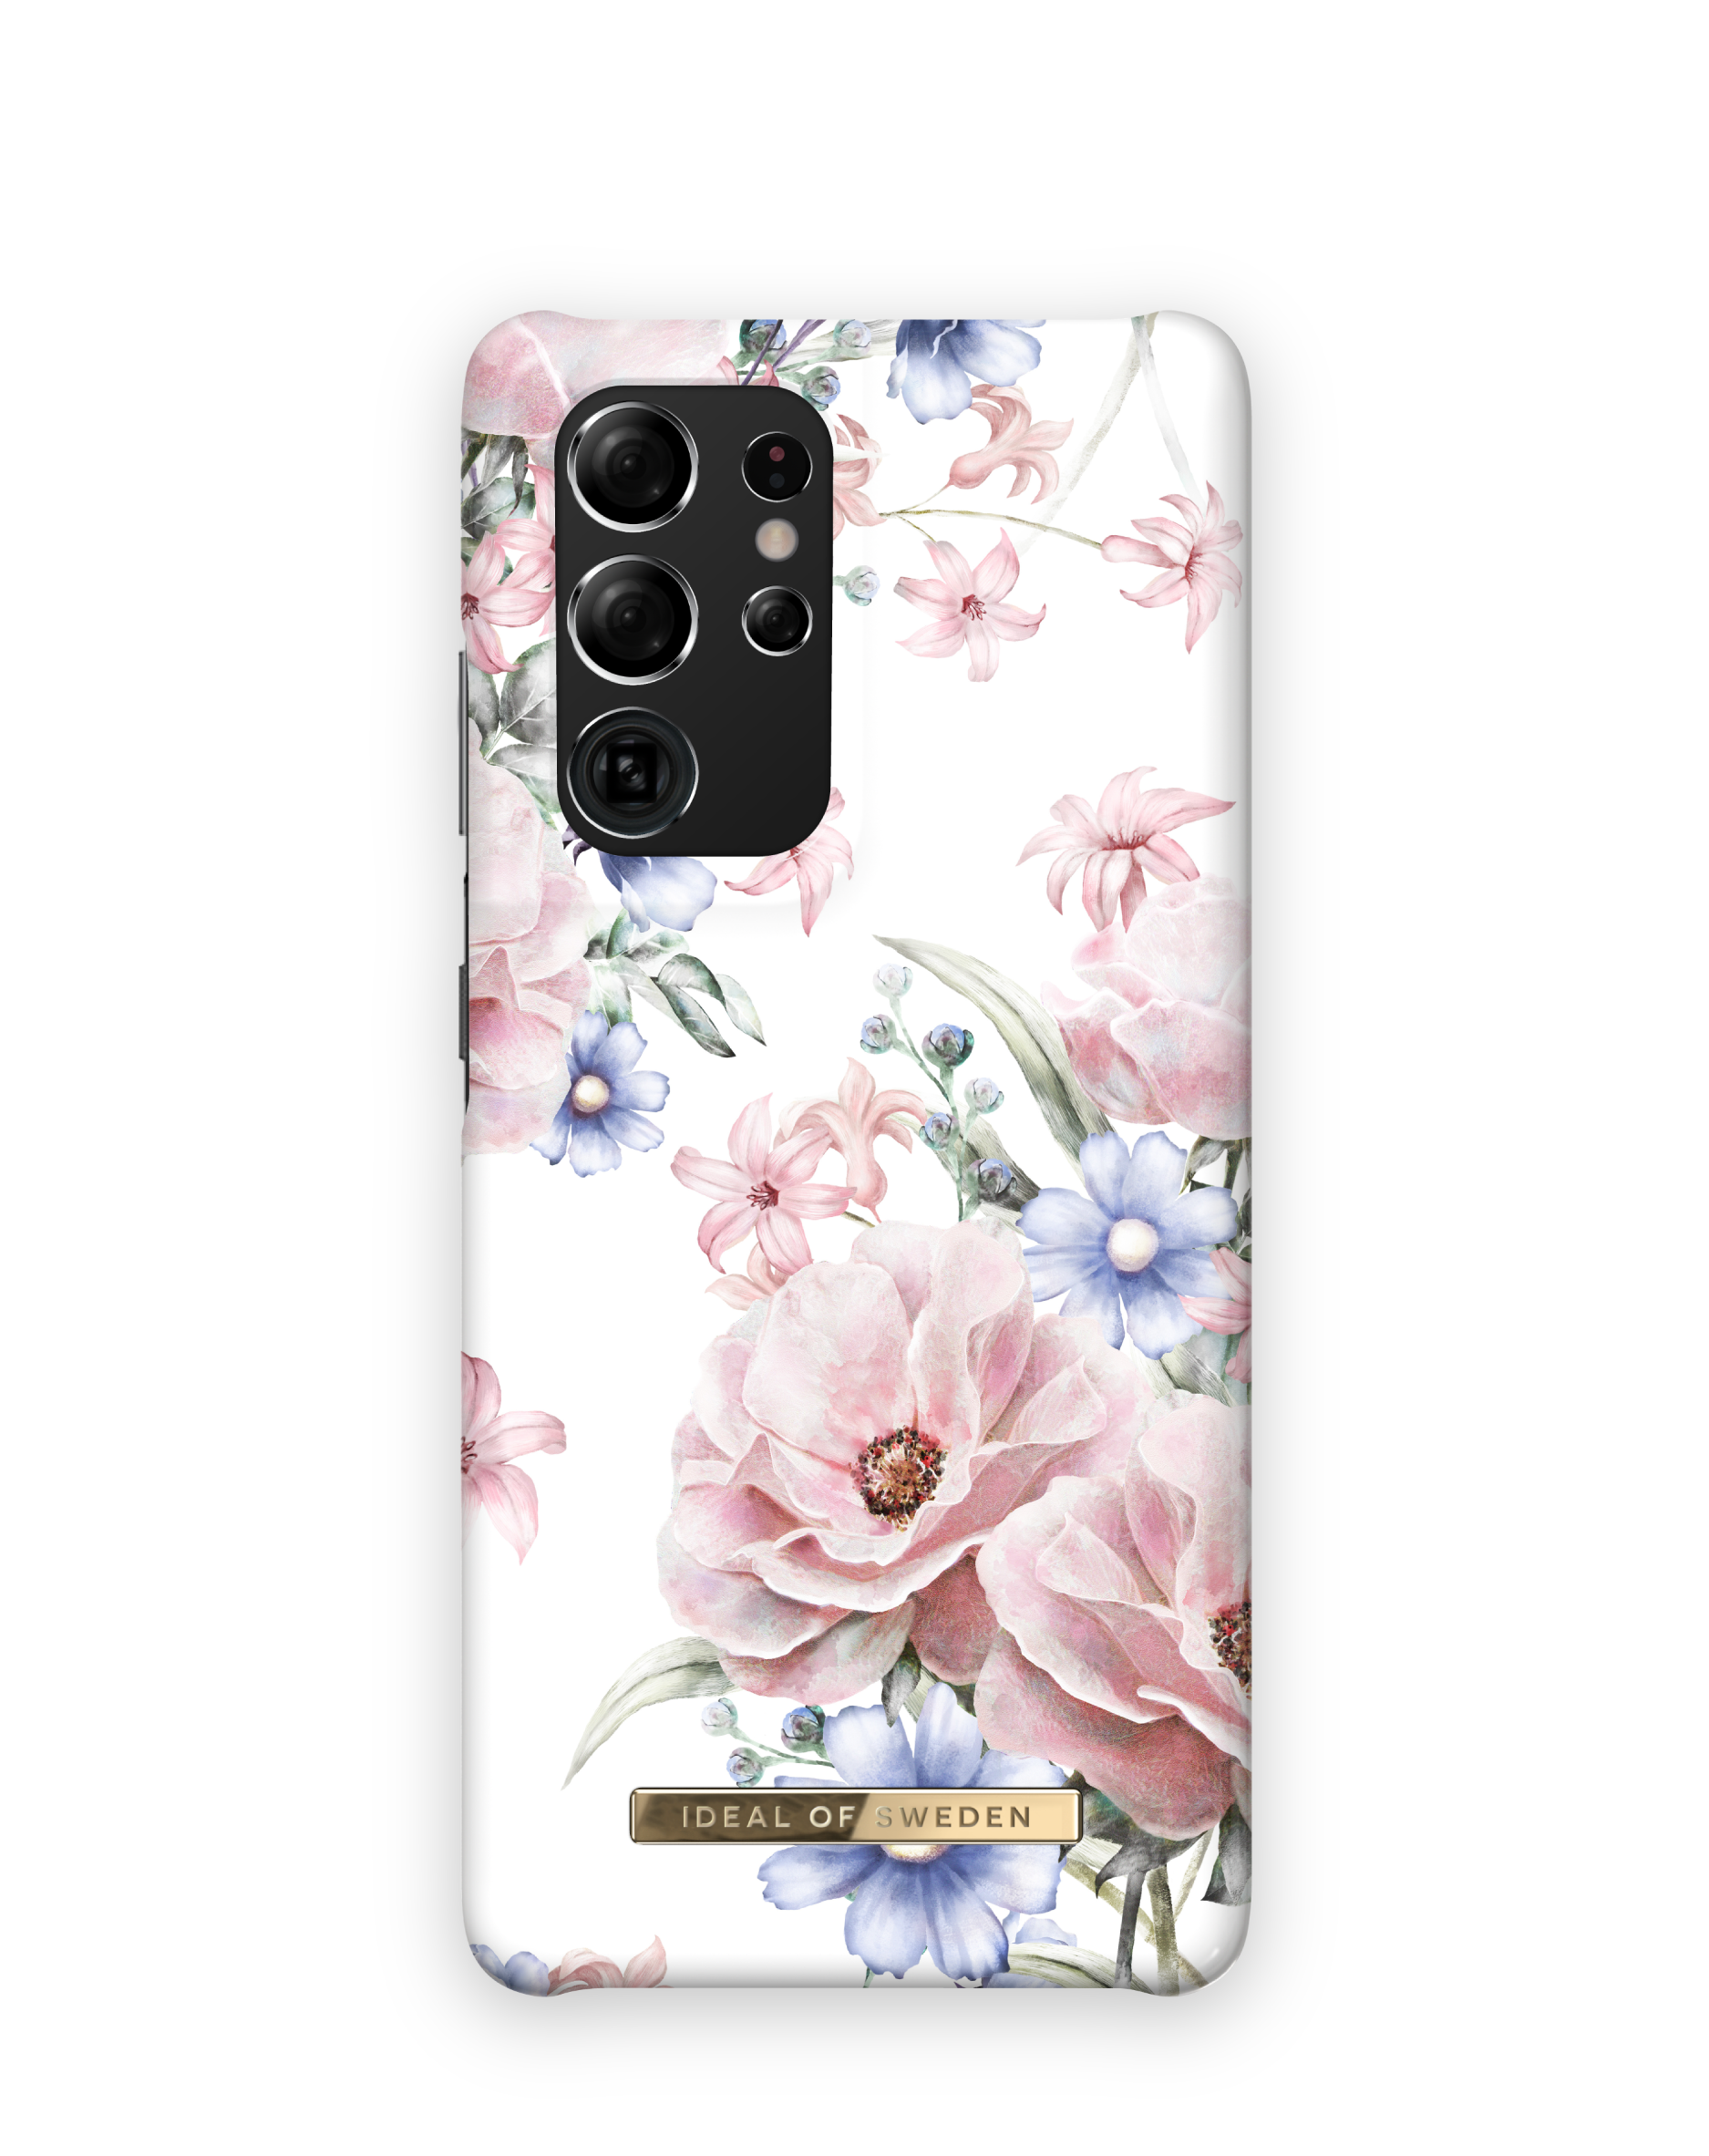 S21 Backcover, Ultra, IDFCS17-S21U-58, Romance IDEAL SWEDEN Samsung, OF Floral Galaxy